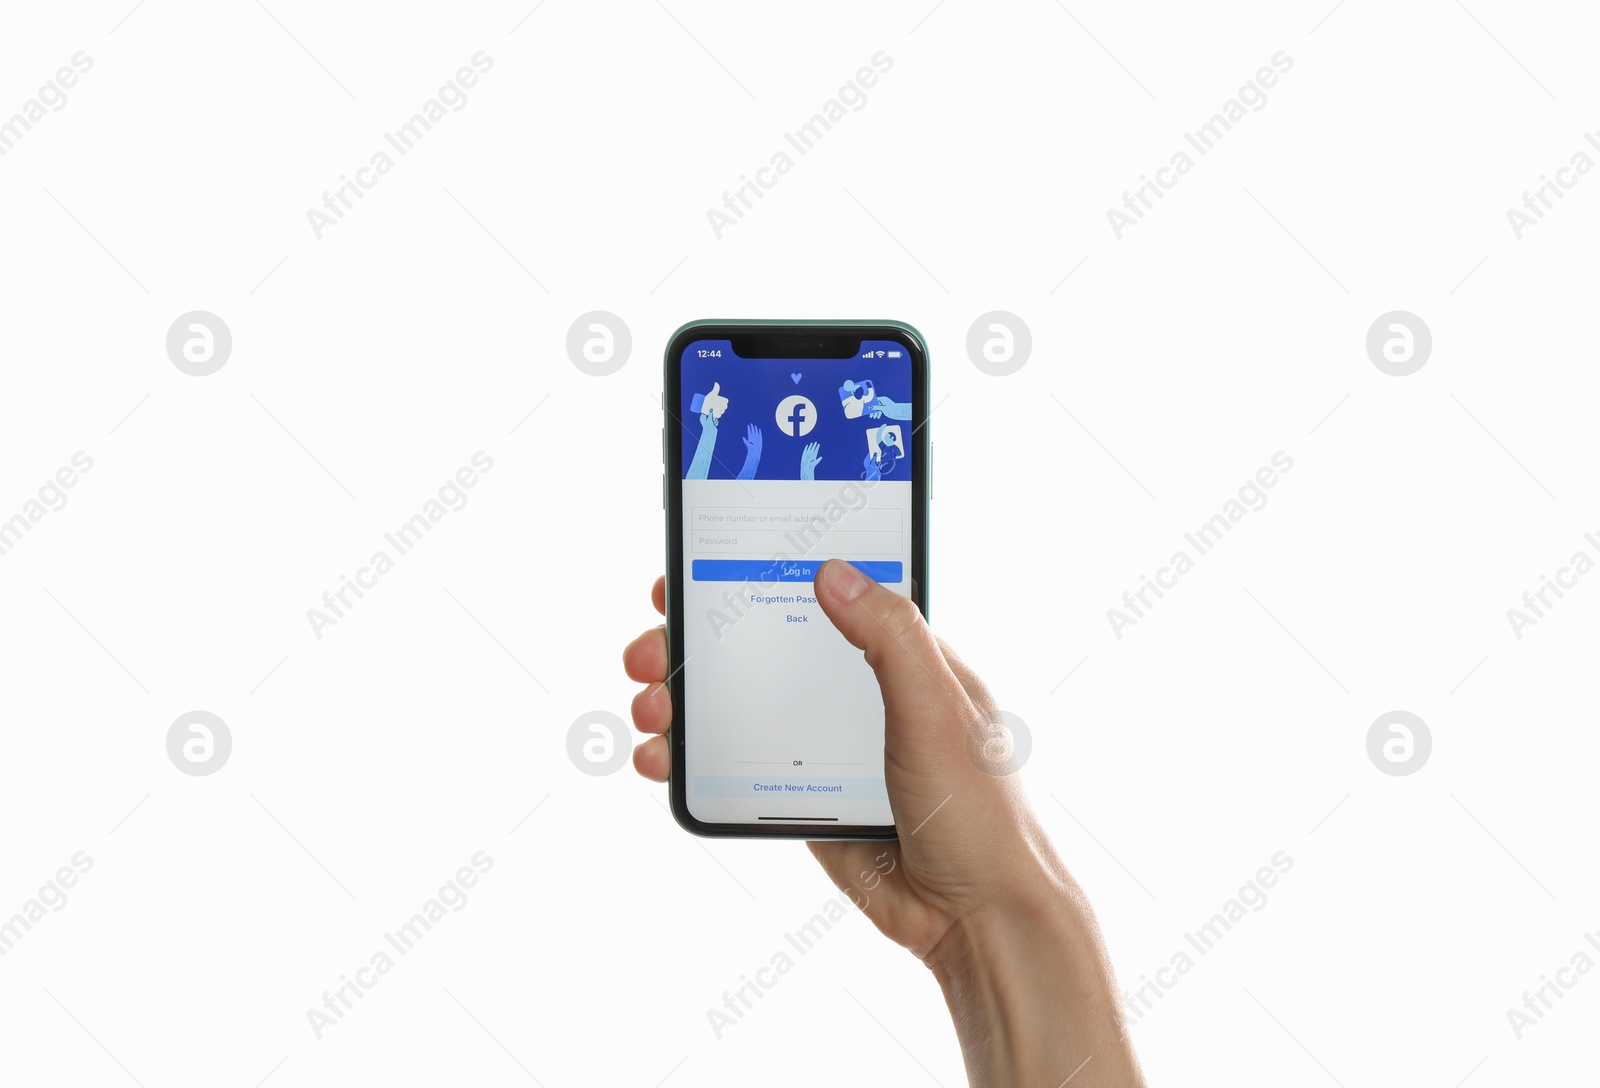 Photo of MYKOLAIV, UKRAINE - JULY 9, 2020: Woman holding iPhone 11 with Facebook app on screen against white background, closeup